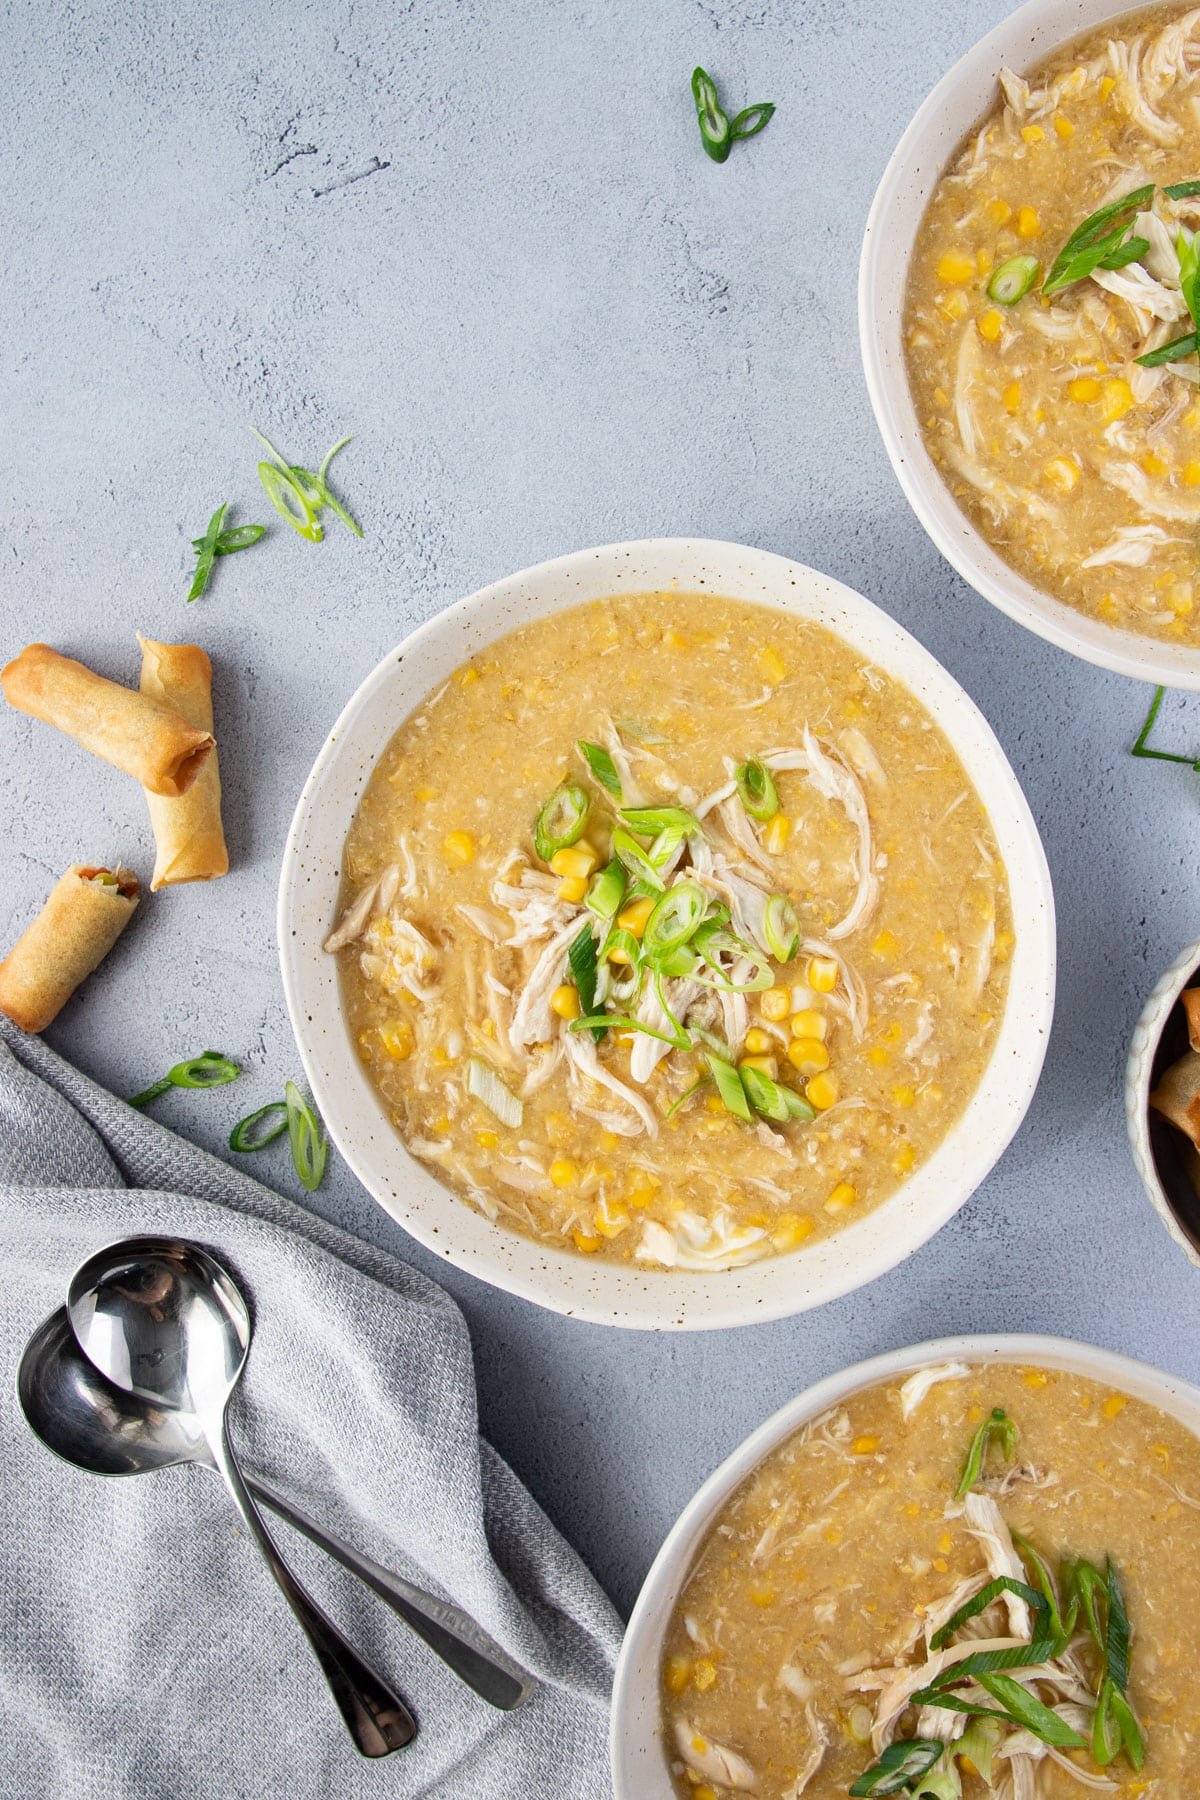 How to Make Chicken Corn Soup With This Simple Recipe